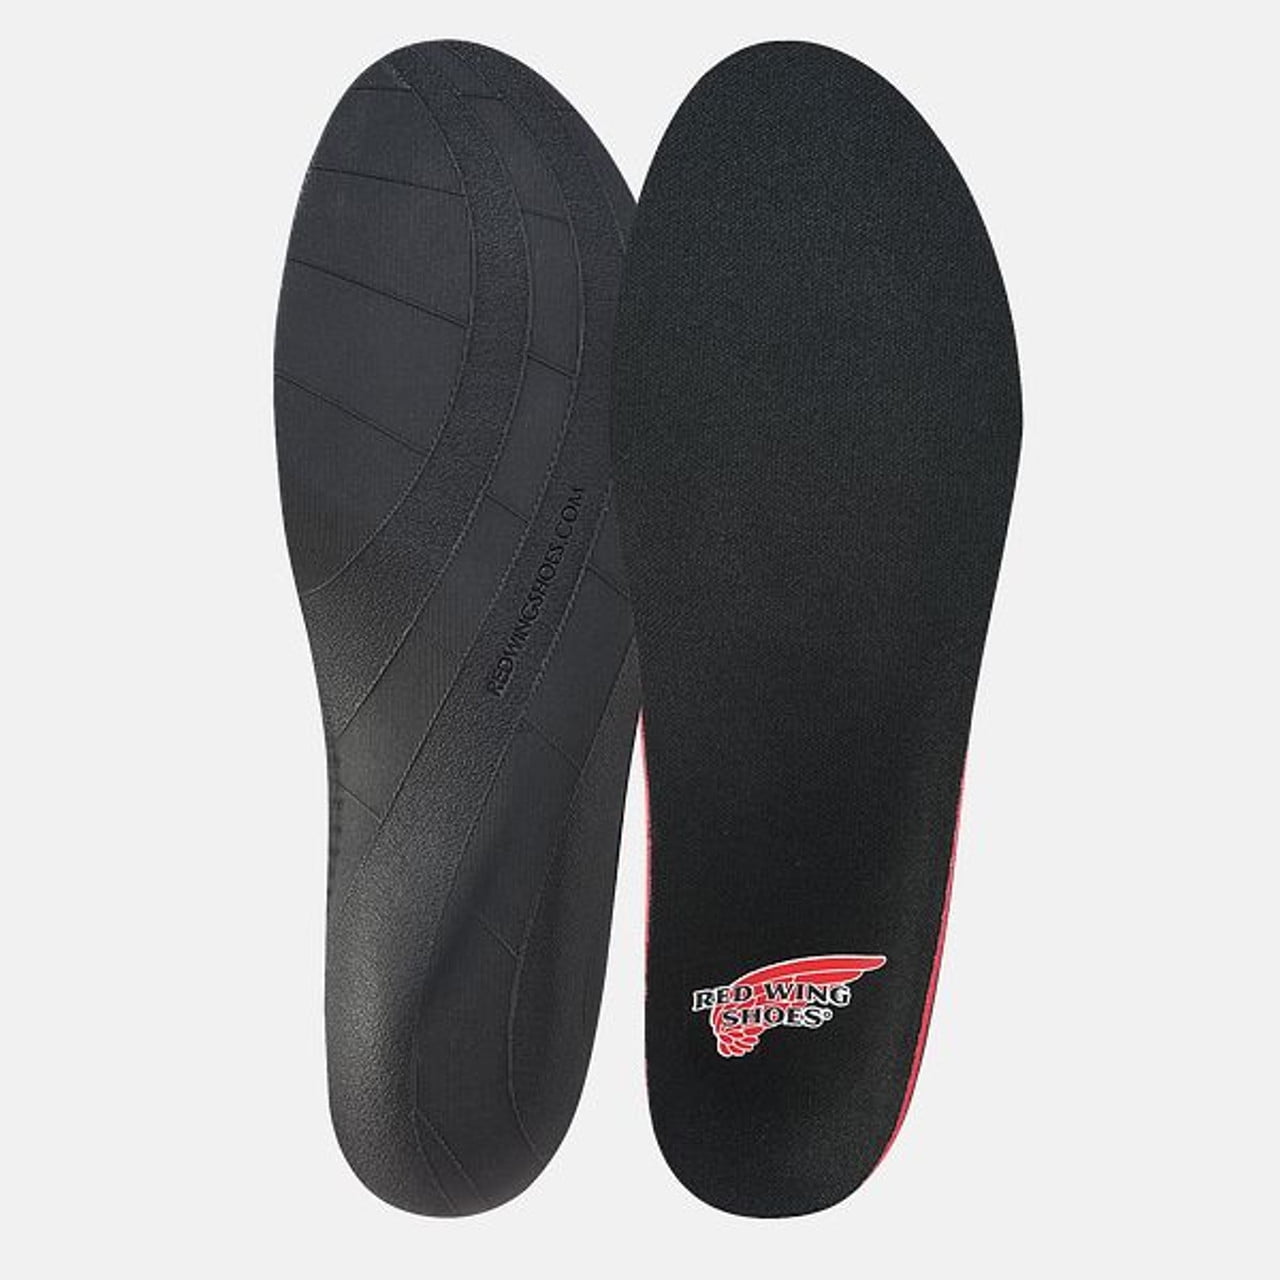 Red Wing Moldable Orthotic 96329, SIZE: 9.5-10 - Walmart.com